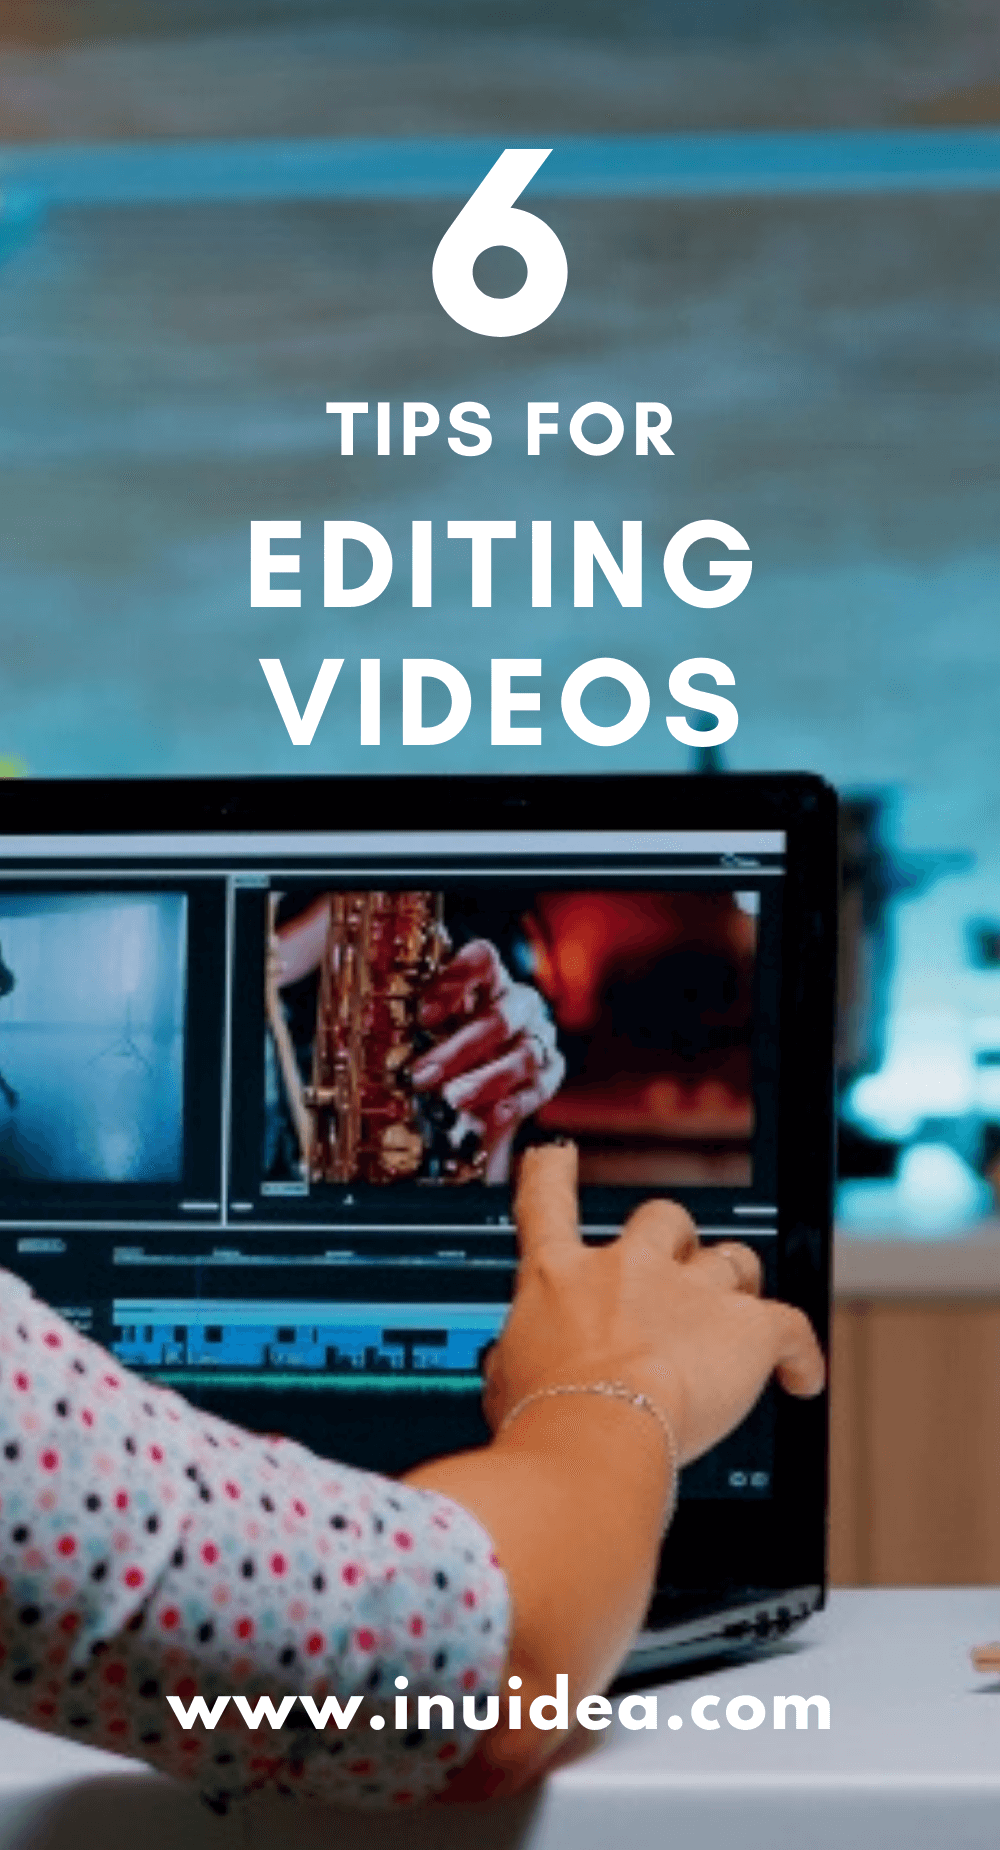 6 Tips for Editing Videos and Improving Your Website Content